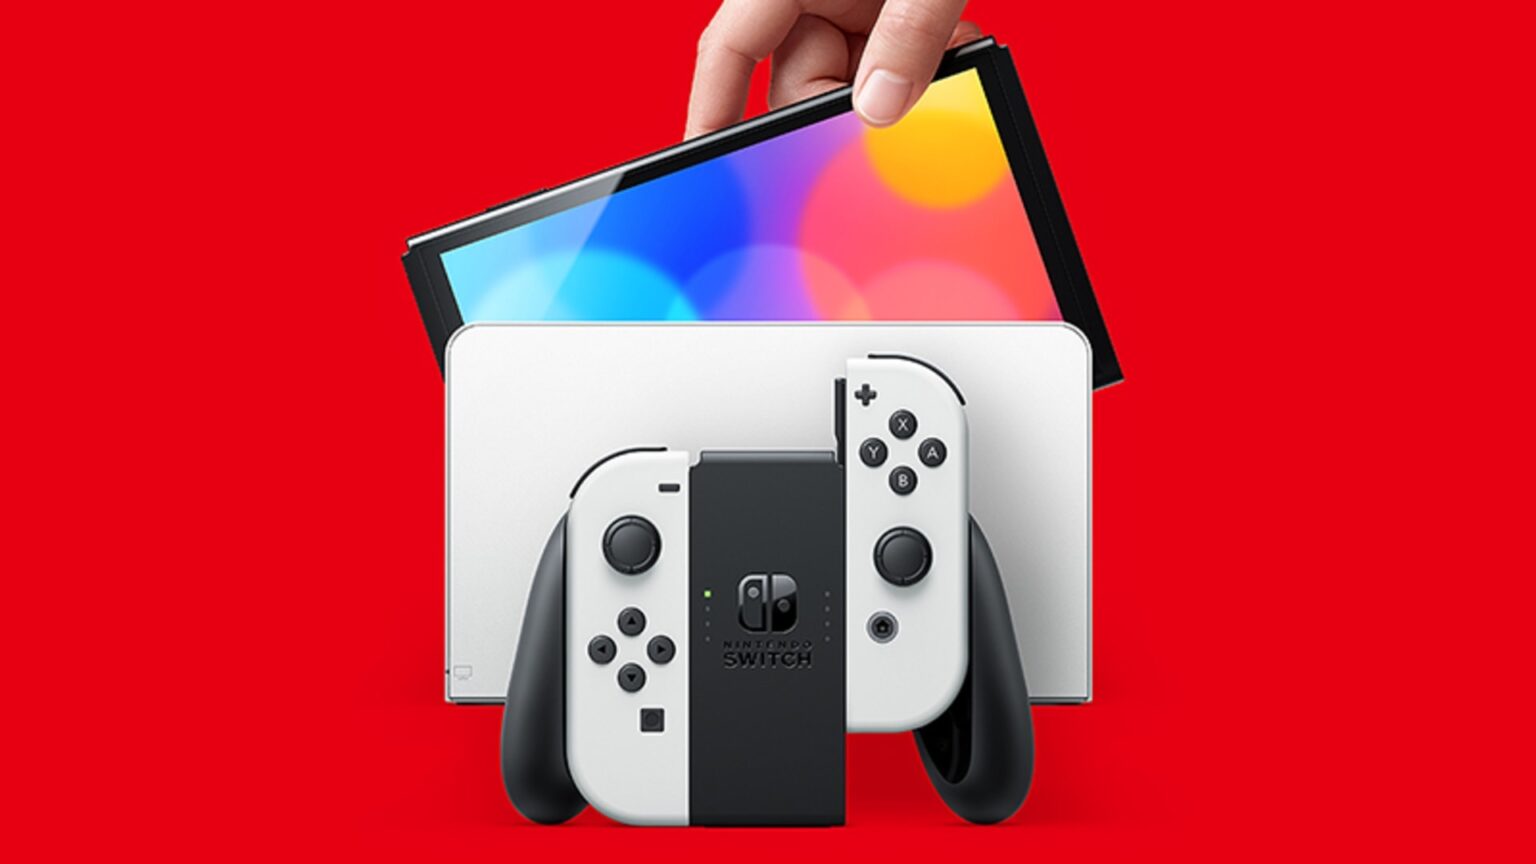 There have been leaks about a supposed “Nintendo Switch Pro” dating back to January 2019! Peek at the upcoming console and its release date here.